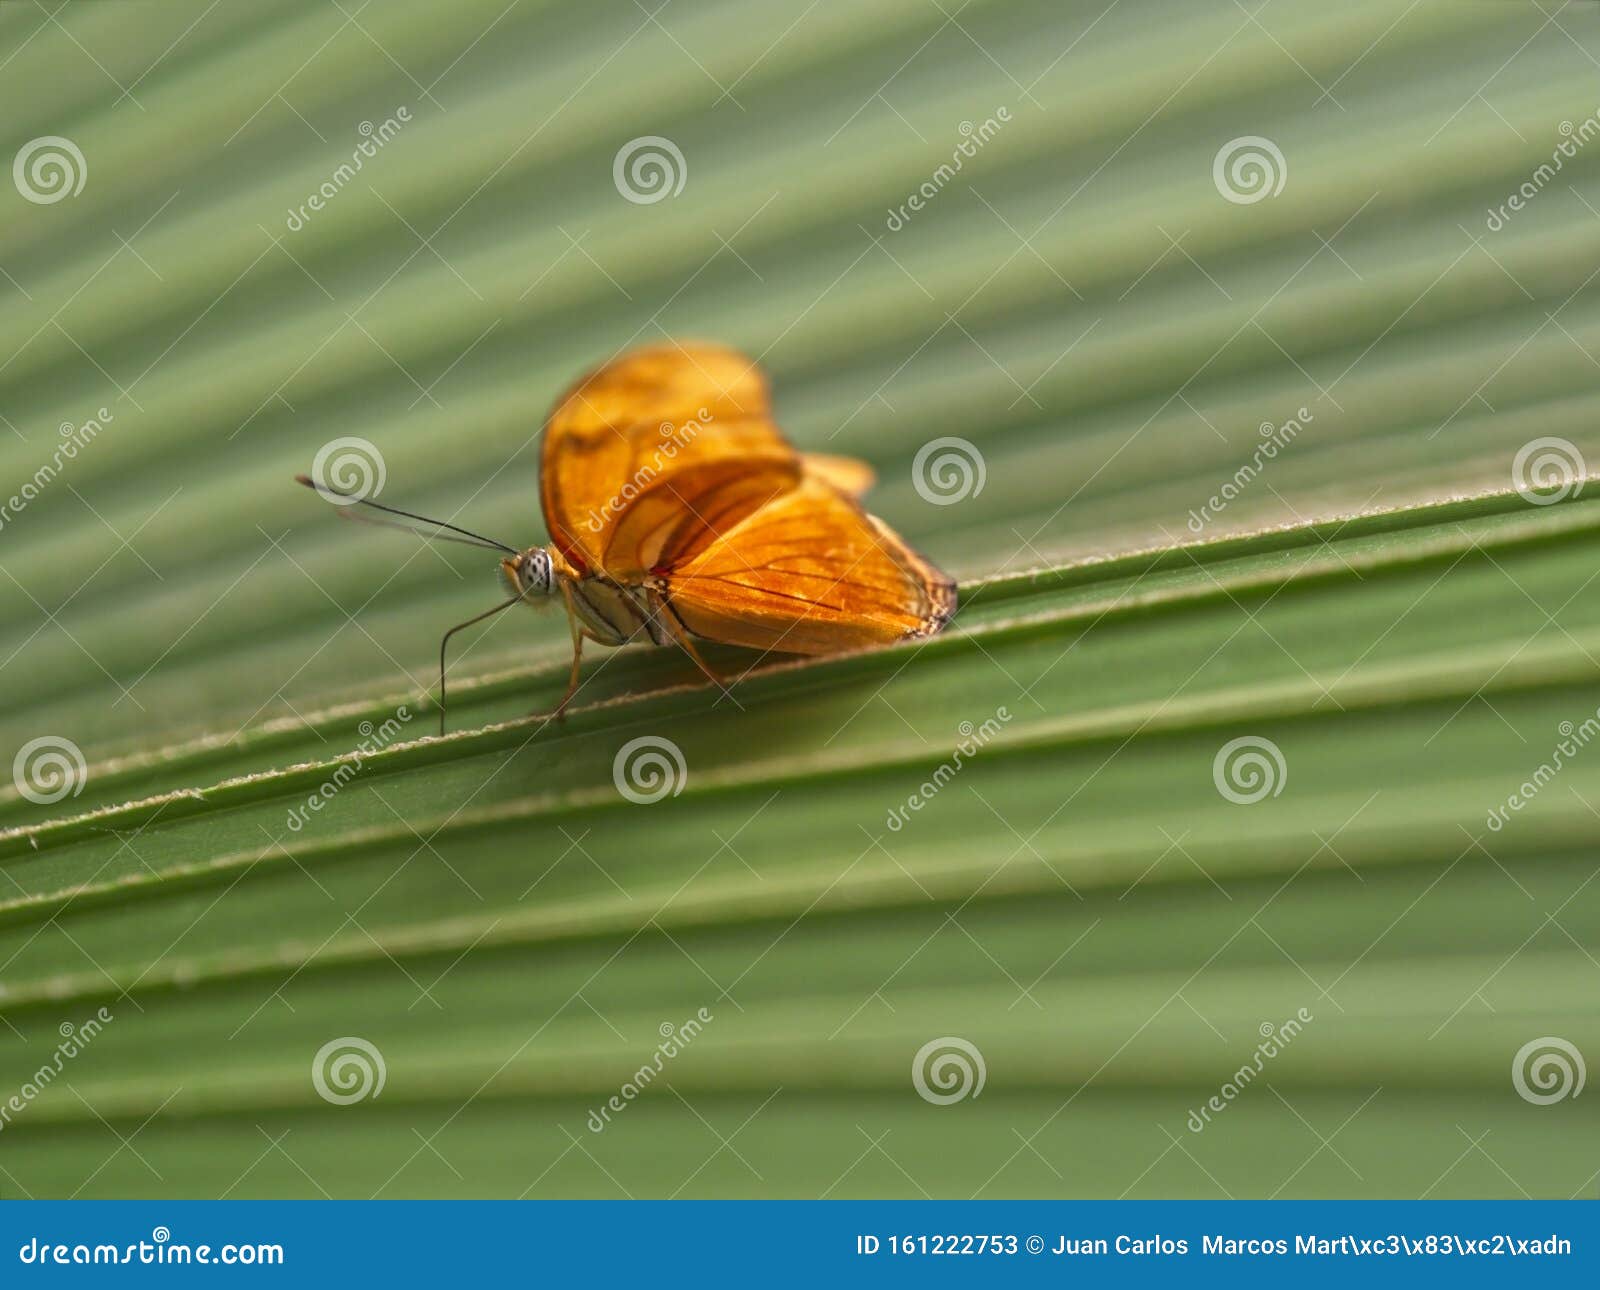 Yellow Passion Butterfly Flame on Green Leaf Stock Image - Image of jungle,  detail: 161222753